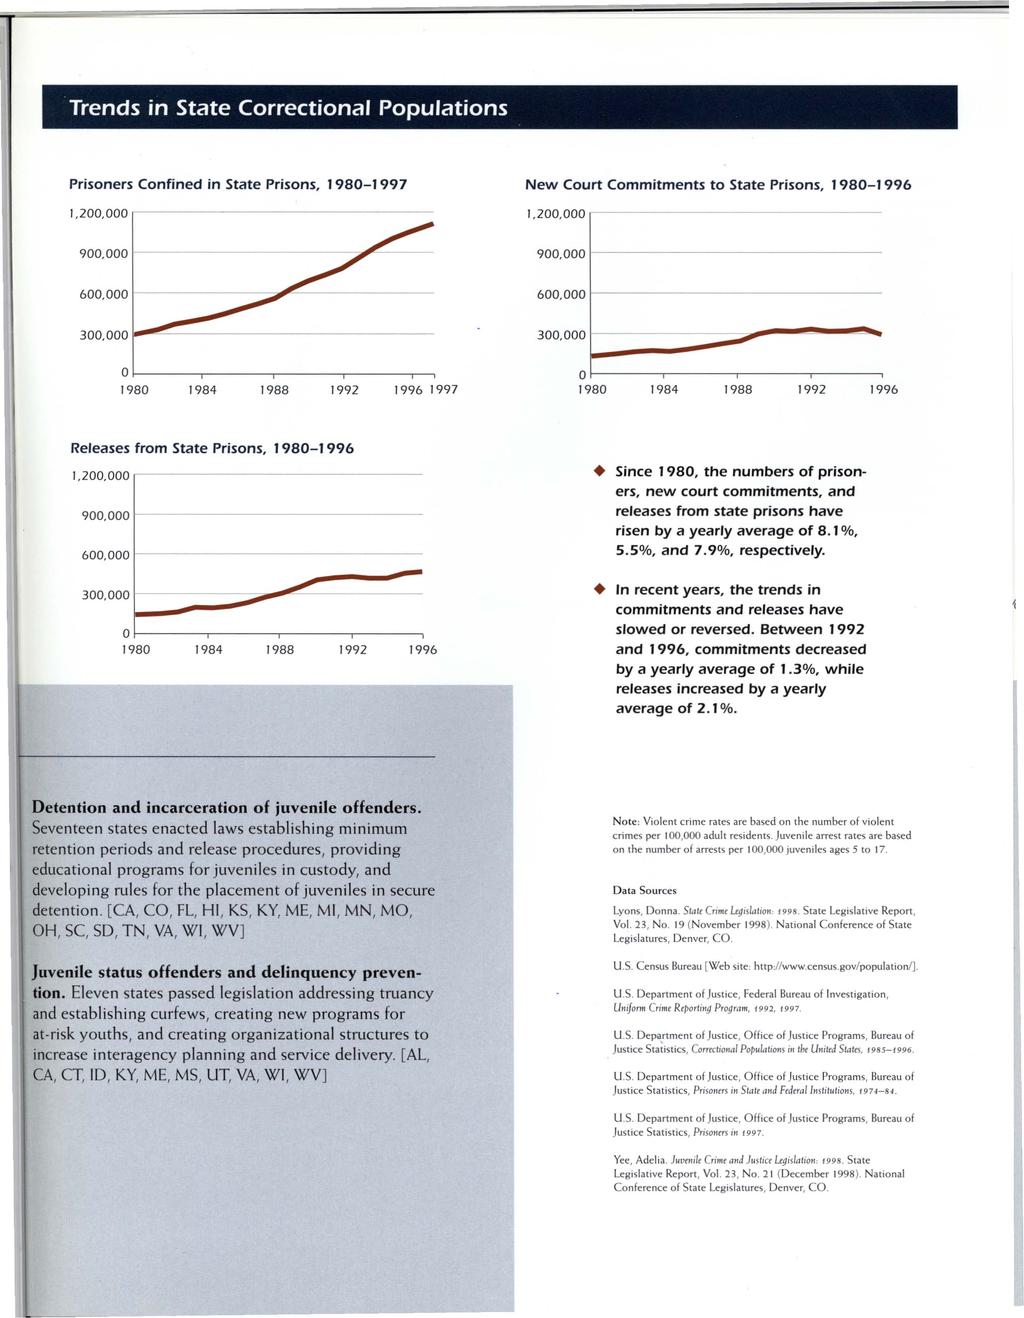 Trends in State Correctional Populations Prisoners Confined in State Prisons, 1980-1997 1,200,000,----------------- New Court Commitments to State Prisons, 1980-1996 1,200,000,------------------